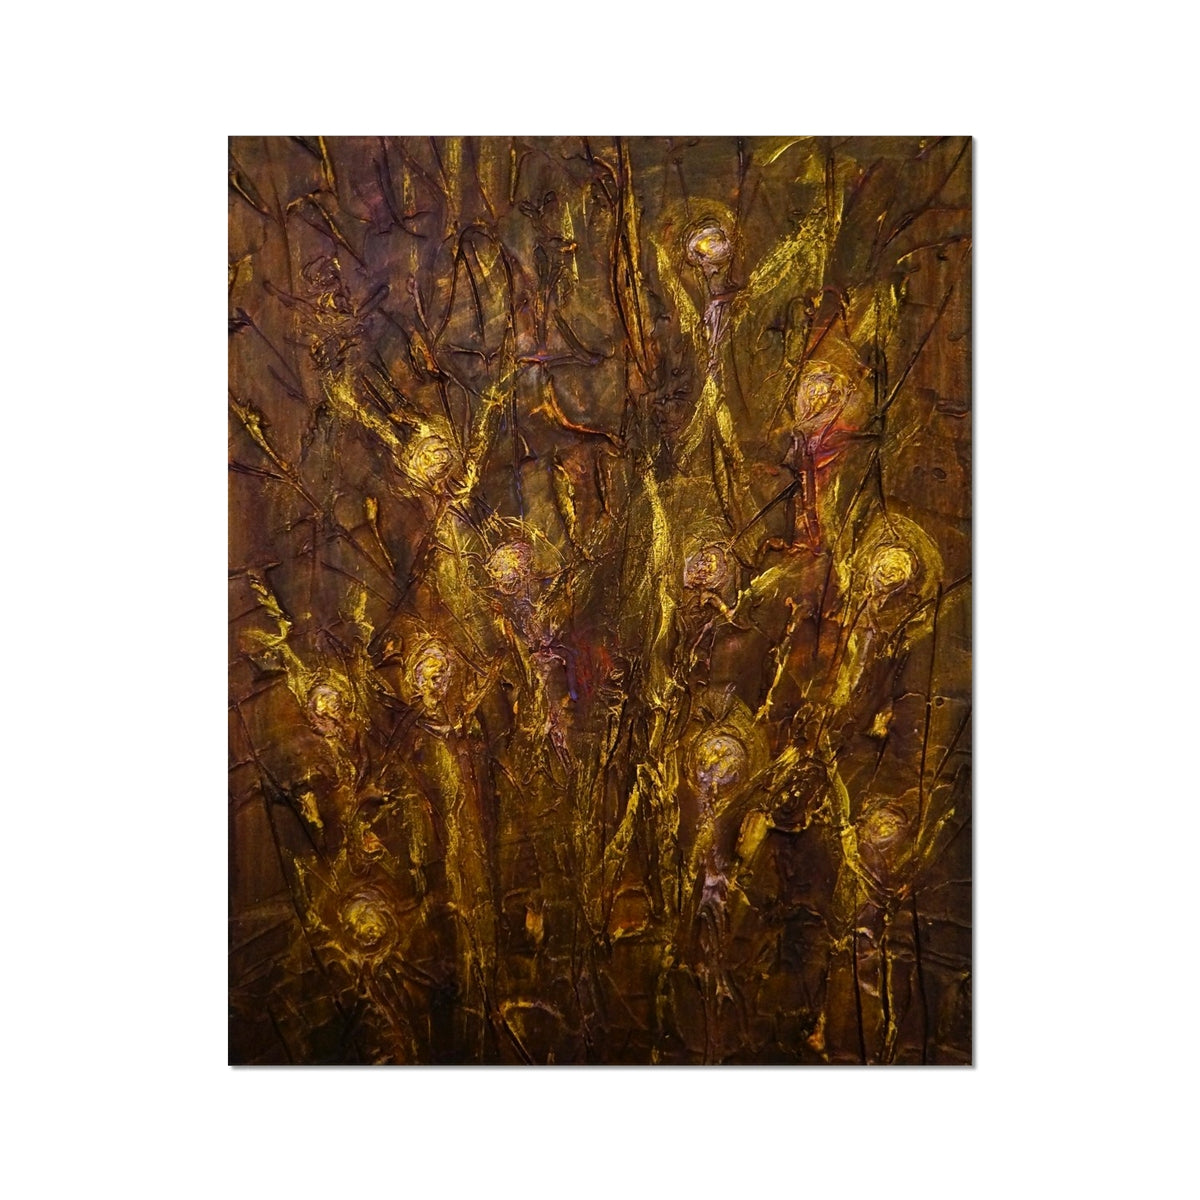 Tam O Shanter Witches Painting | Artist Proof Collector Prints From Scotland-Artist Proof Collector Prints-Abstract & Impressionistic Art Gallery-16"x20"-Paintings, Prints, Homeware, Art Gifts From Scotland By Scottish Artist Kevin Hunter